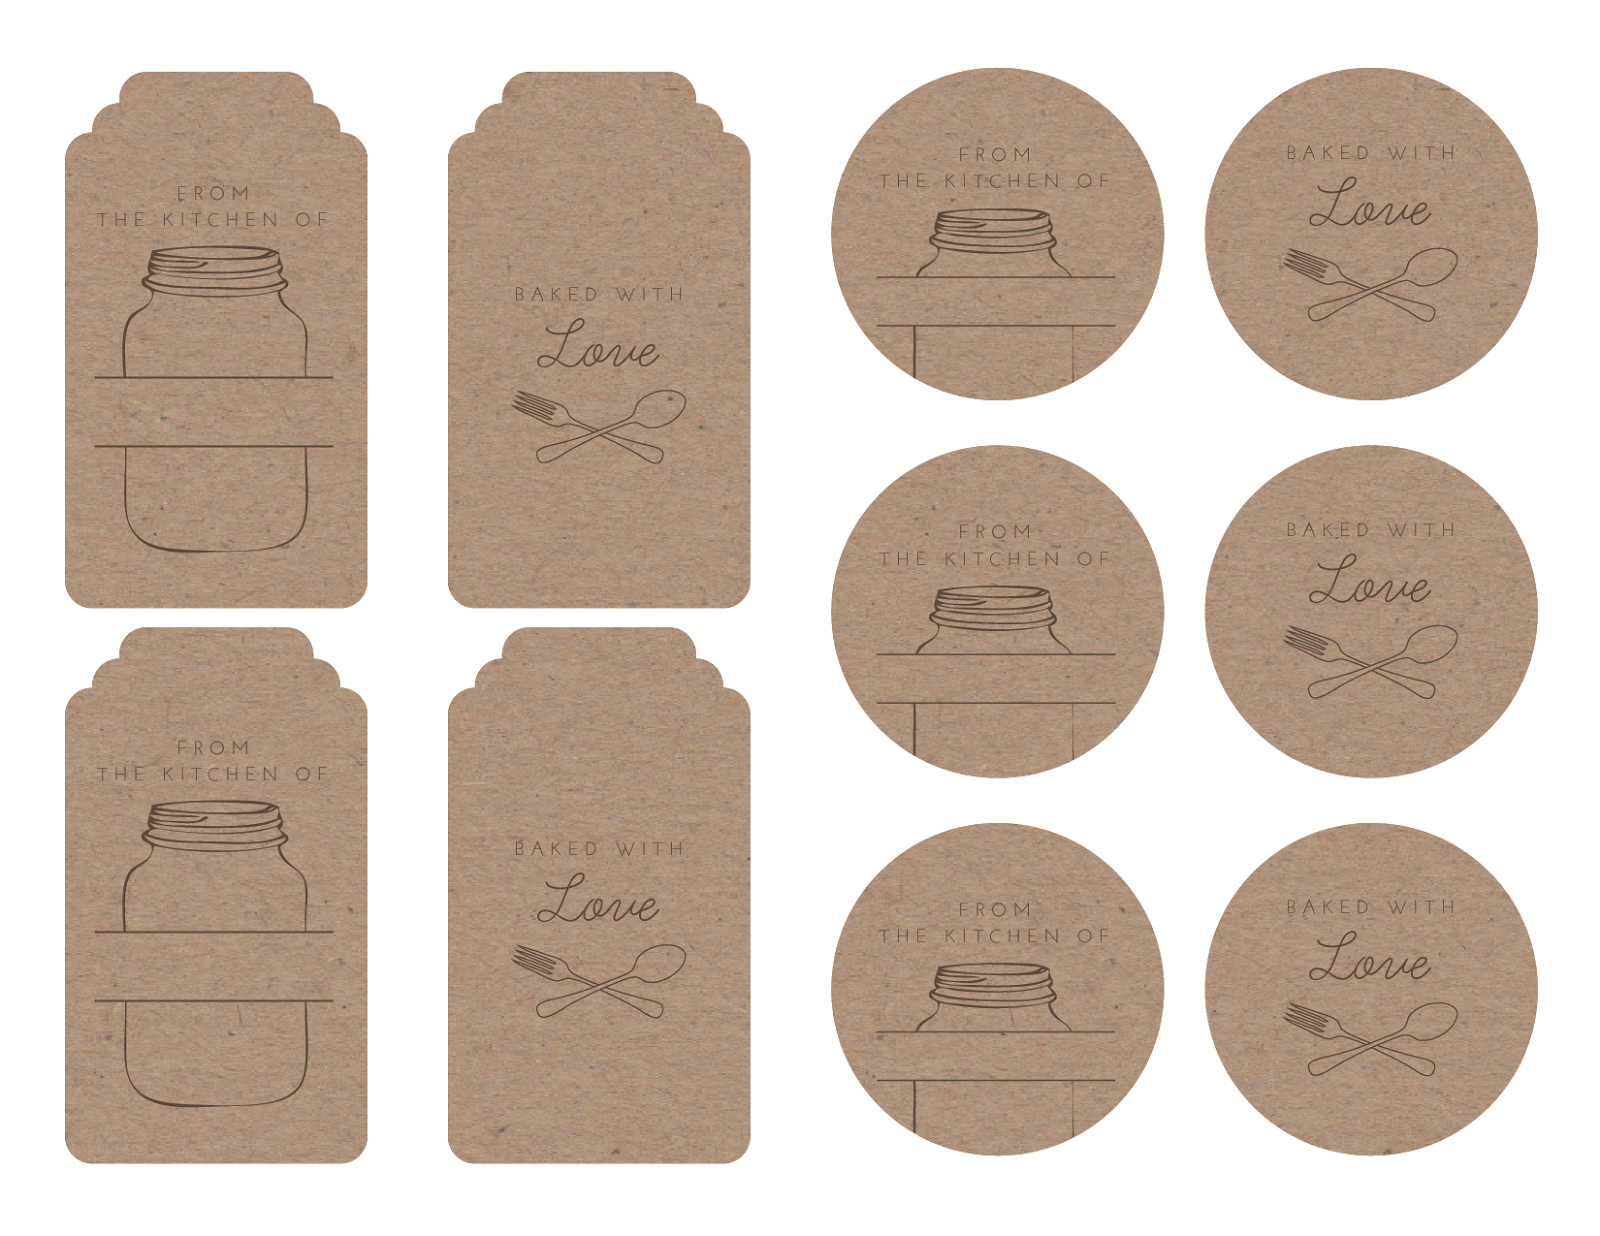 Homemade Tags For Your Baked Goods | Printables &amp; Graphics | Bake - Free Printable Baking Labels